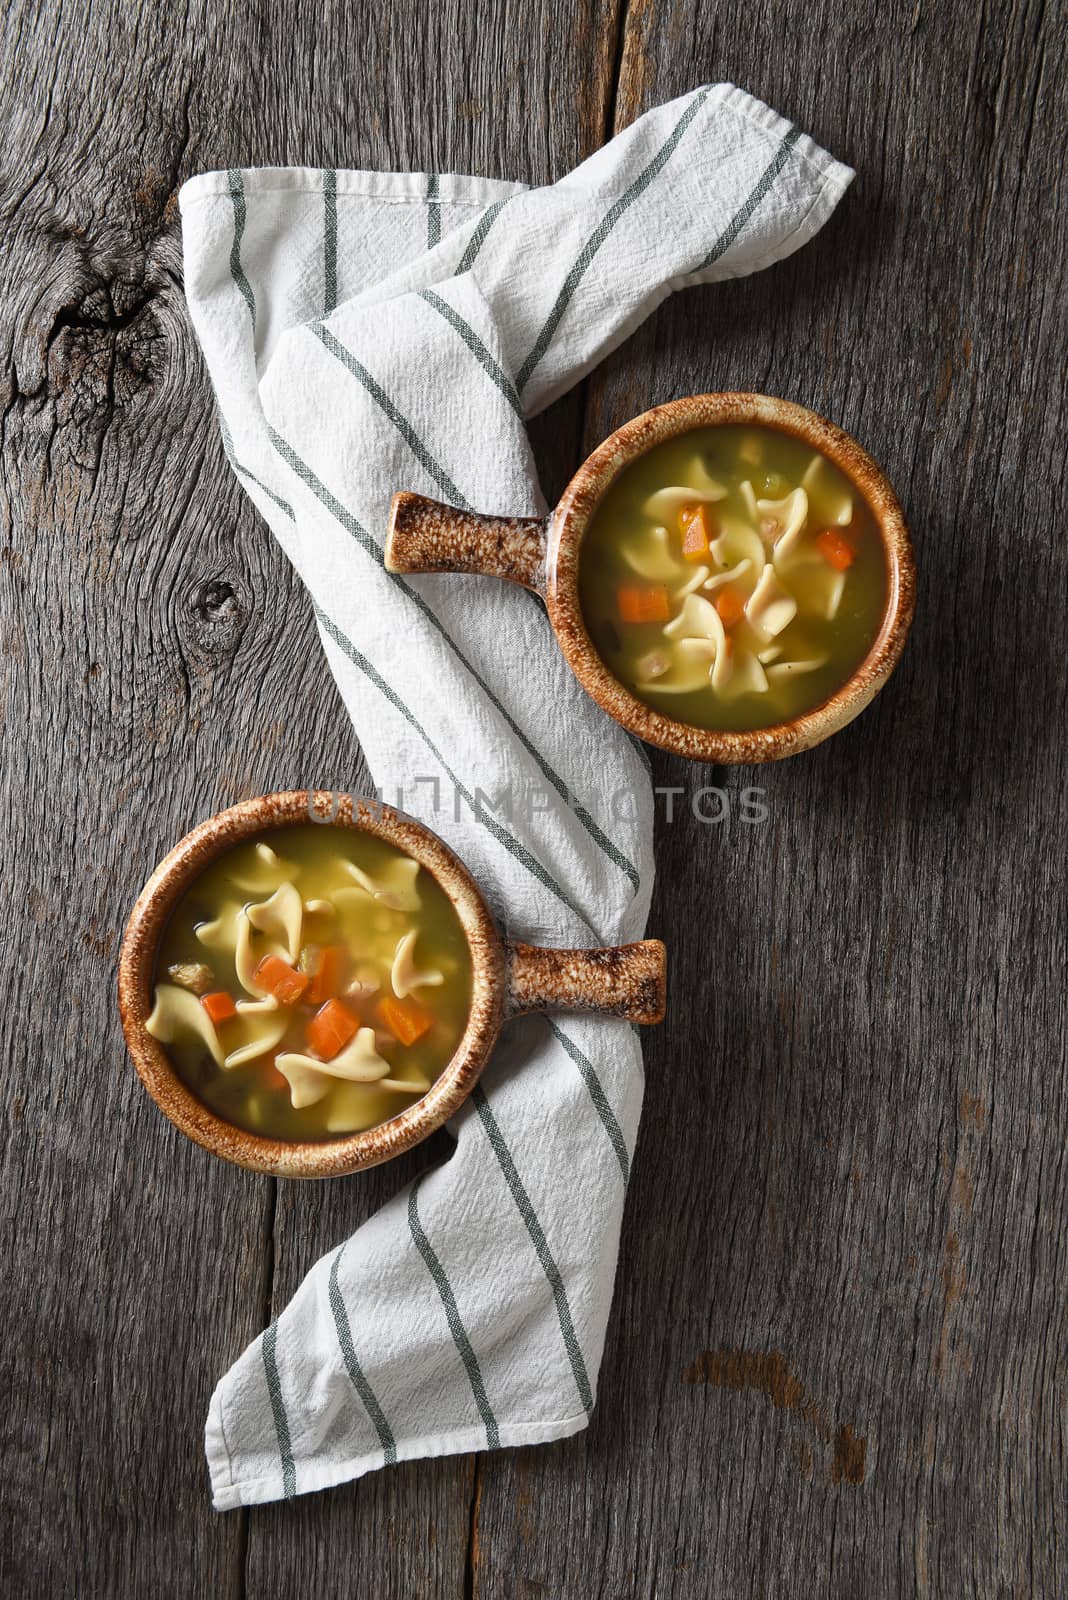 Flat lay with two bowls of homemade Chicken Noodle Soup on a rustic wood table with a kitchen towel.